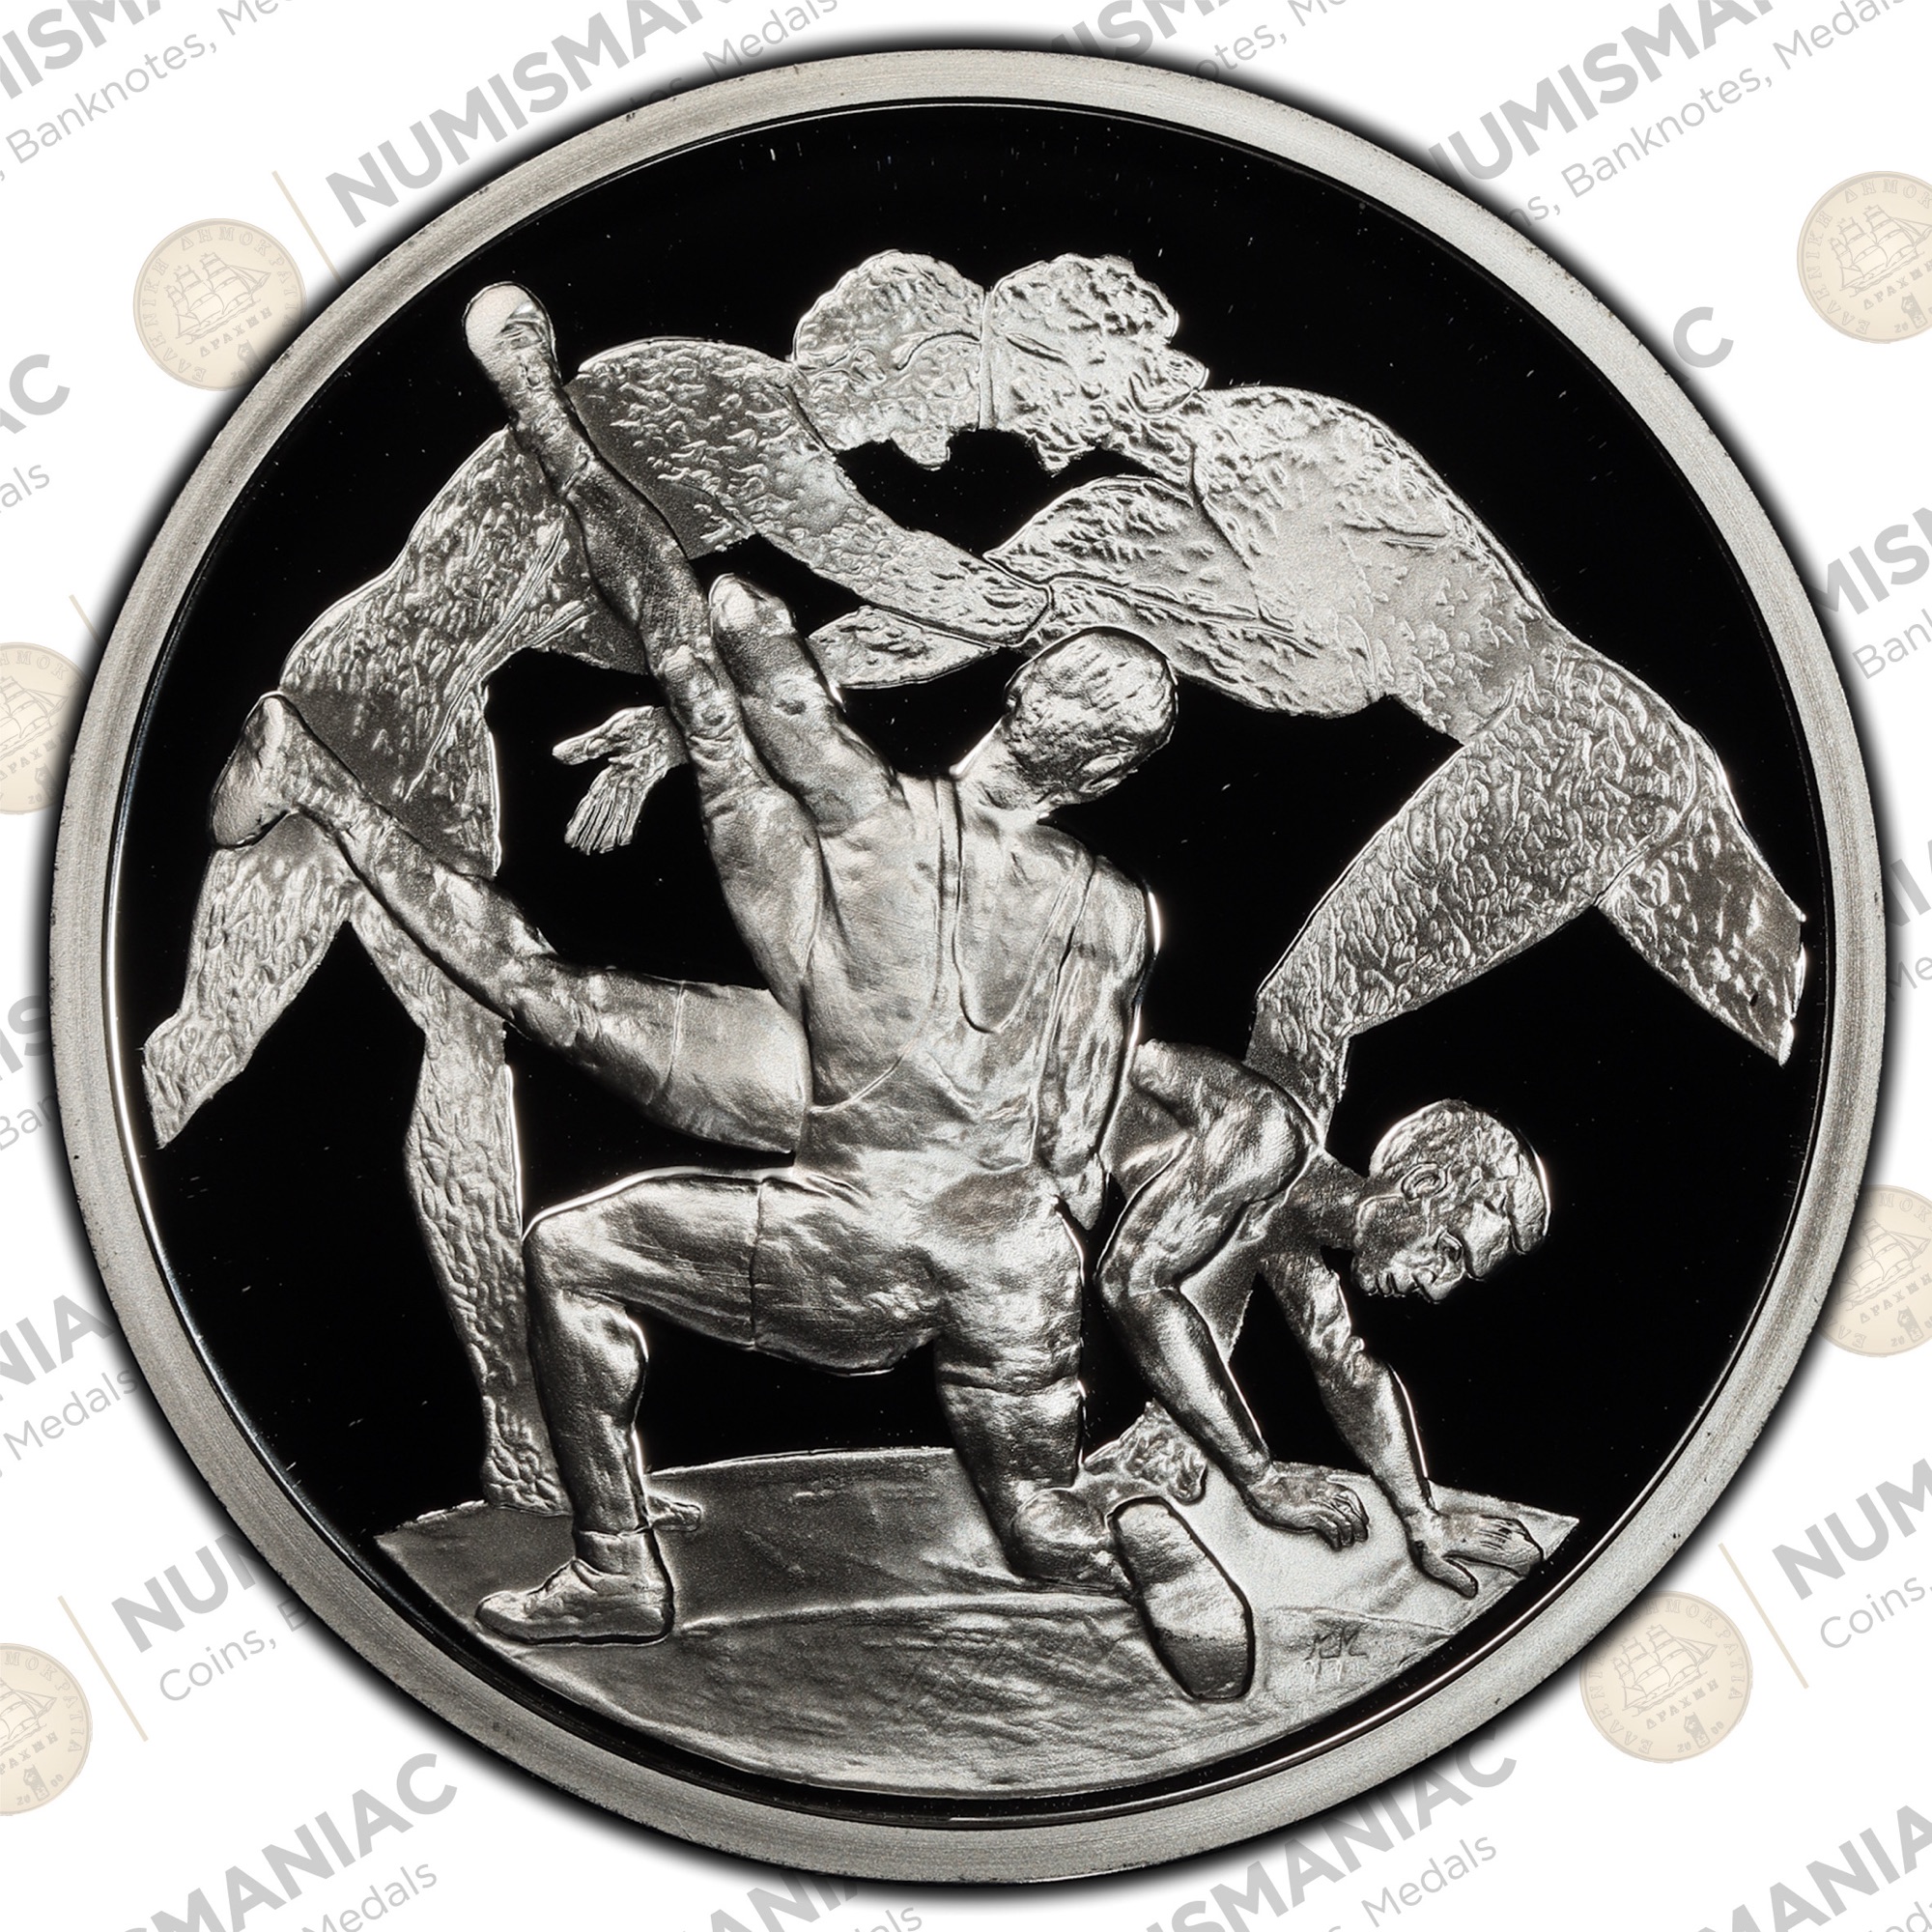 Greece 🇬🇷 10 Euro 2003 "Wrestling" 1oz Silver Bullion Proof Coin with capsule.A